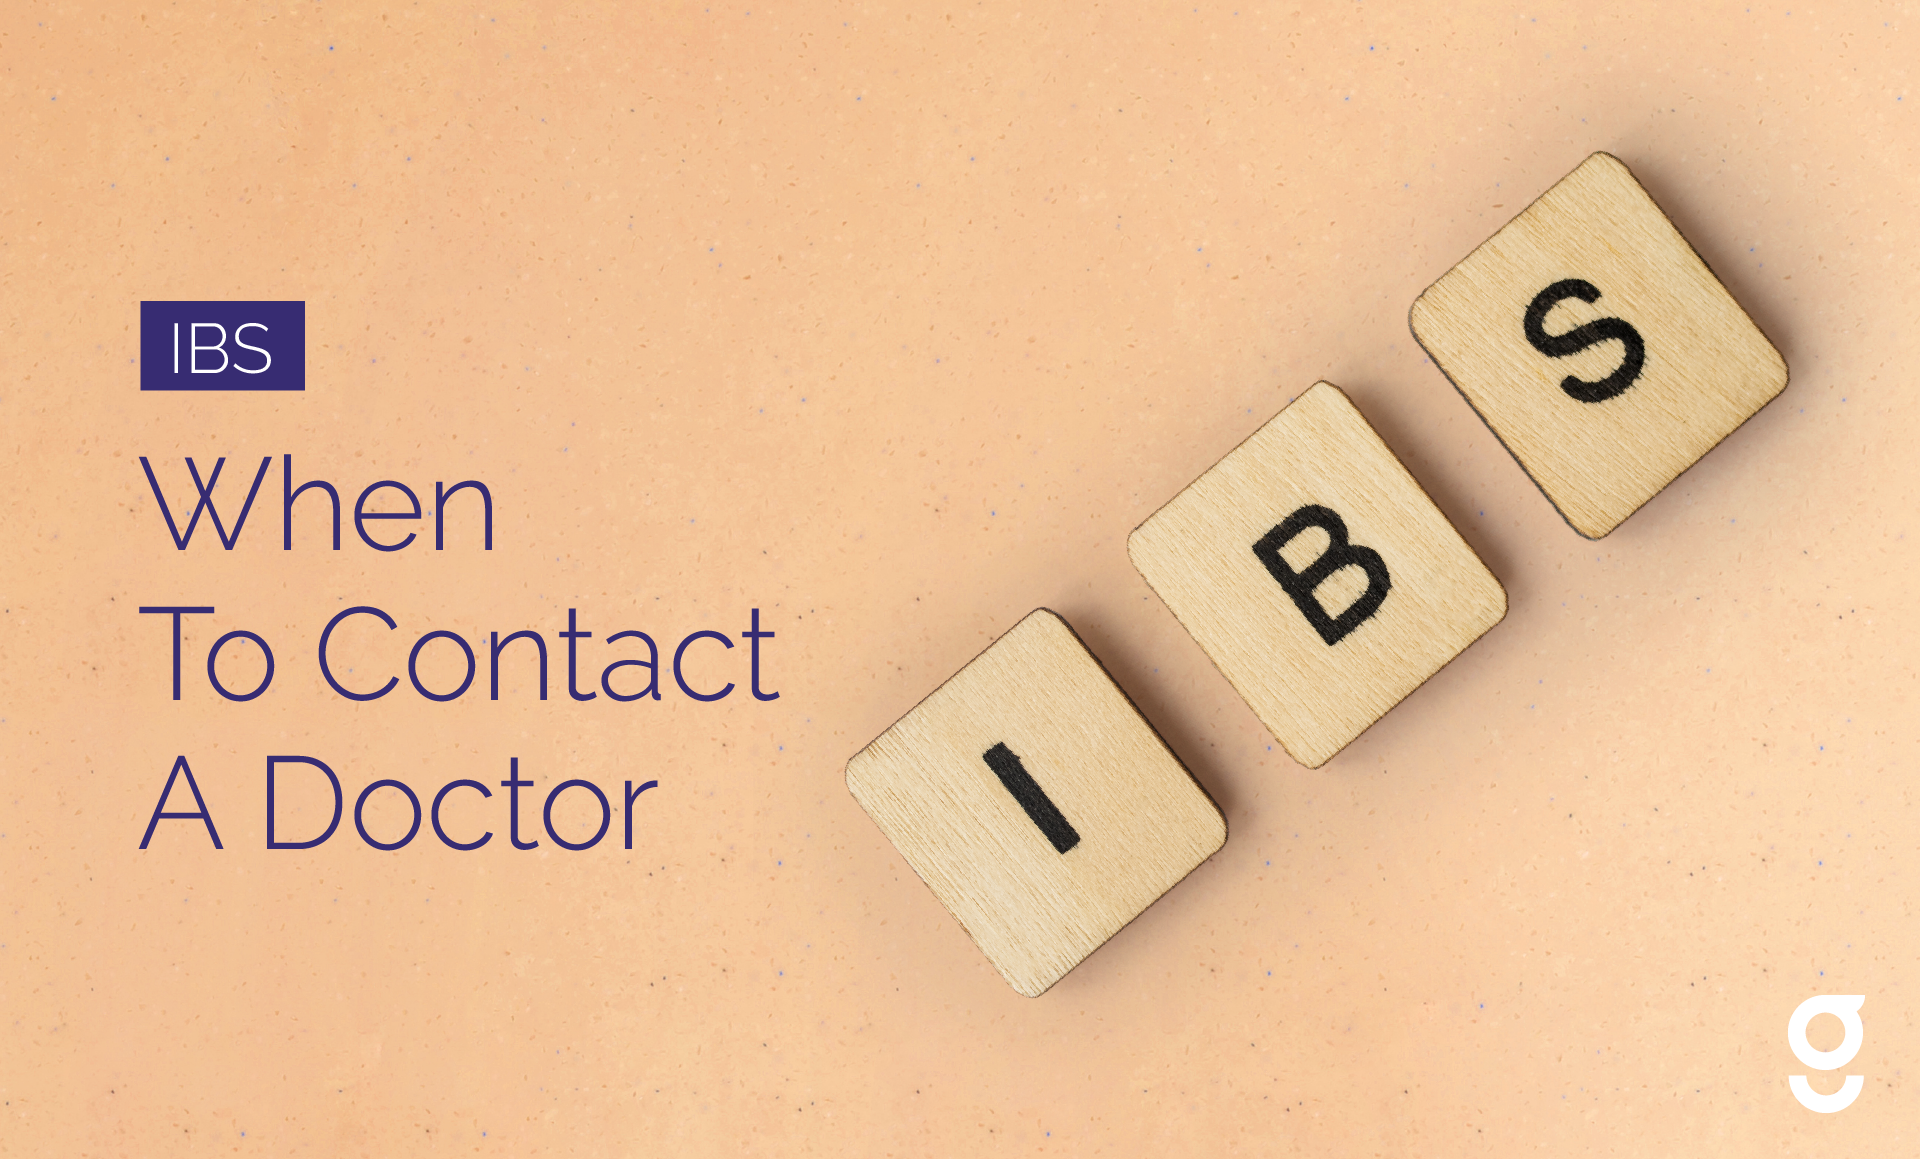 IBS: When To Contact Your Doctor